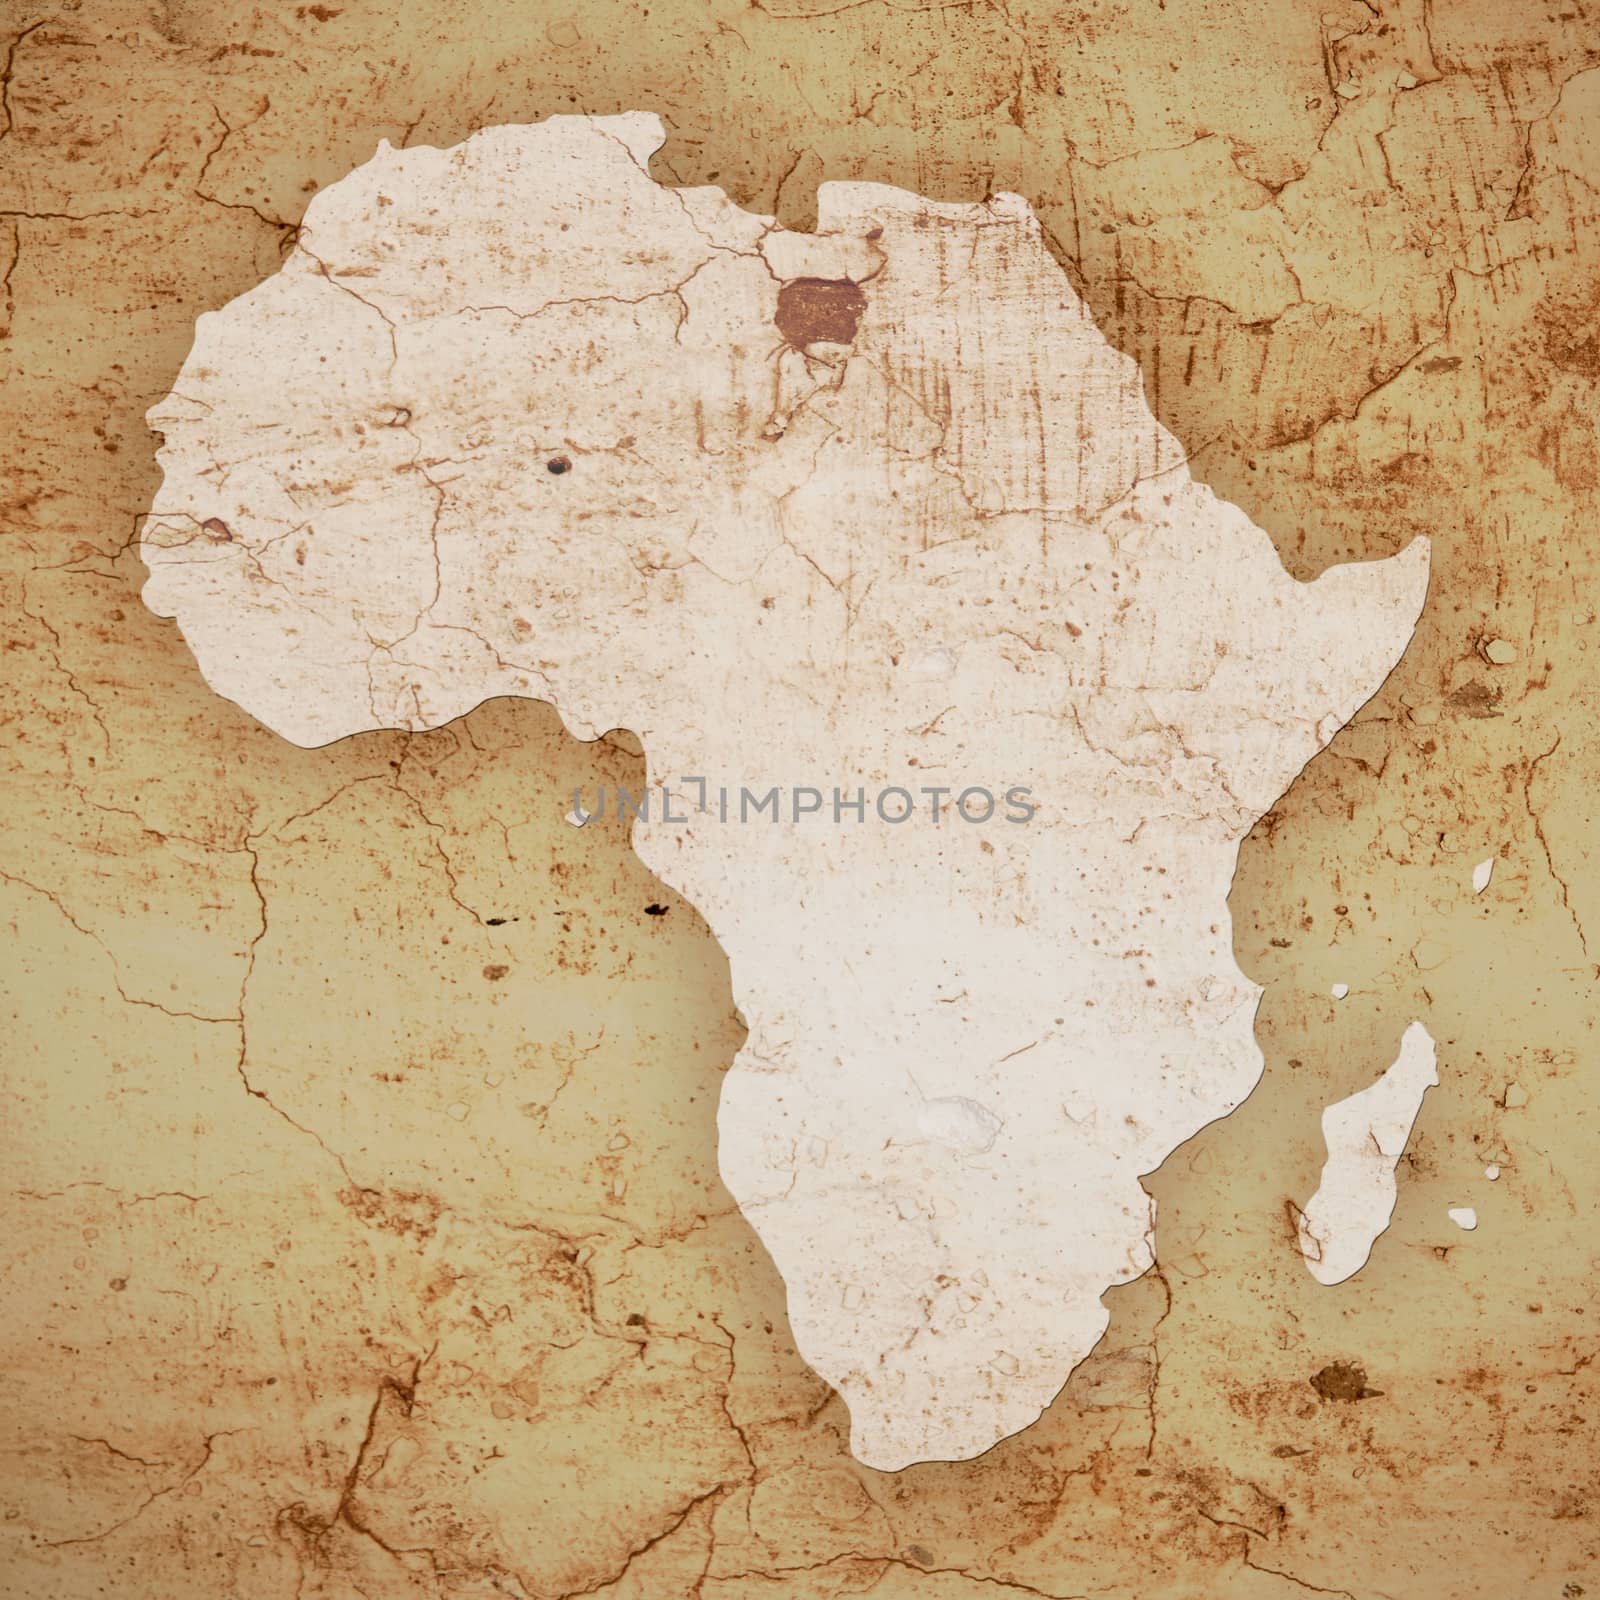 textured map of africa